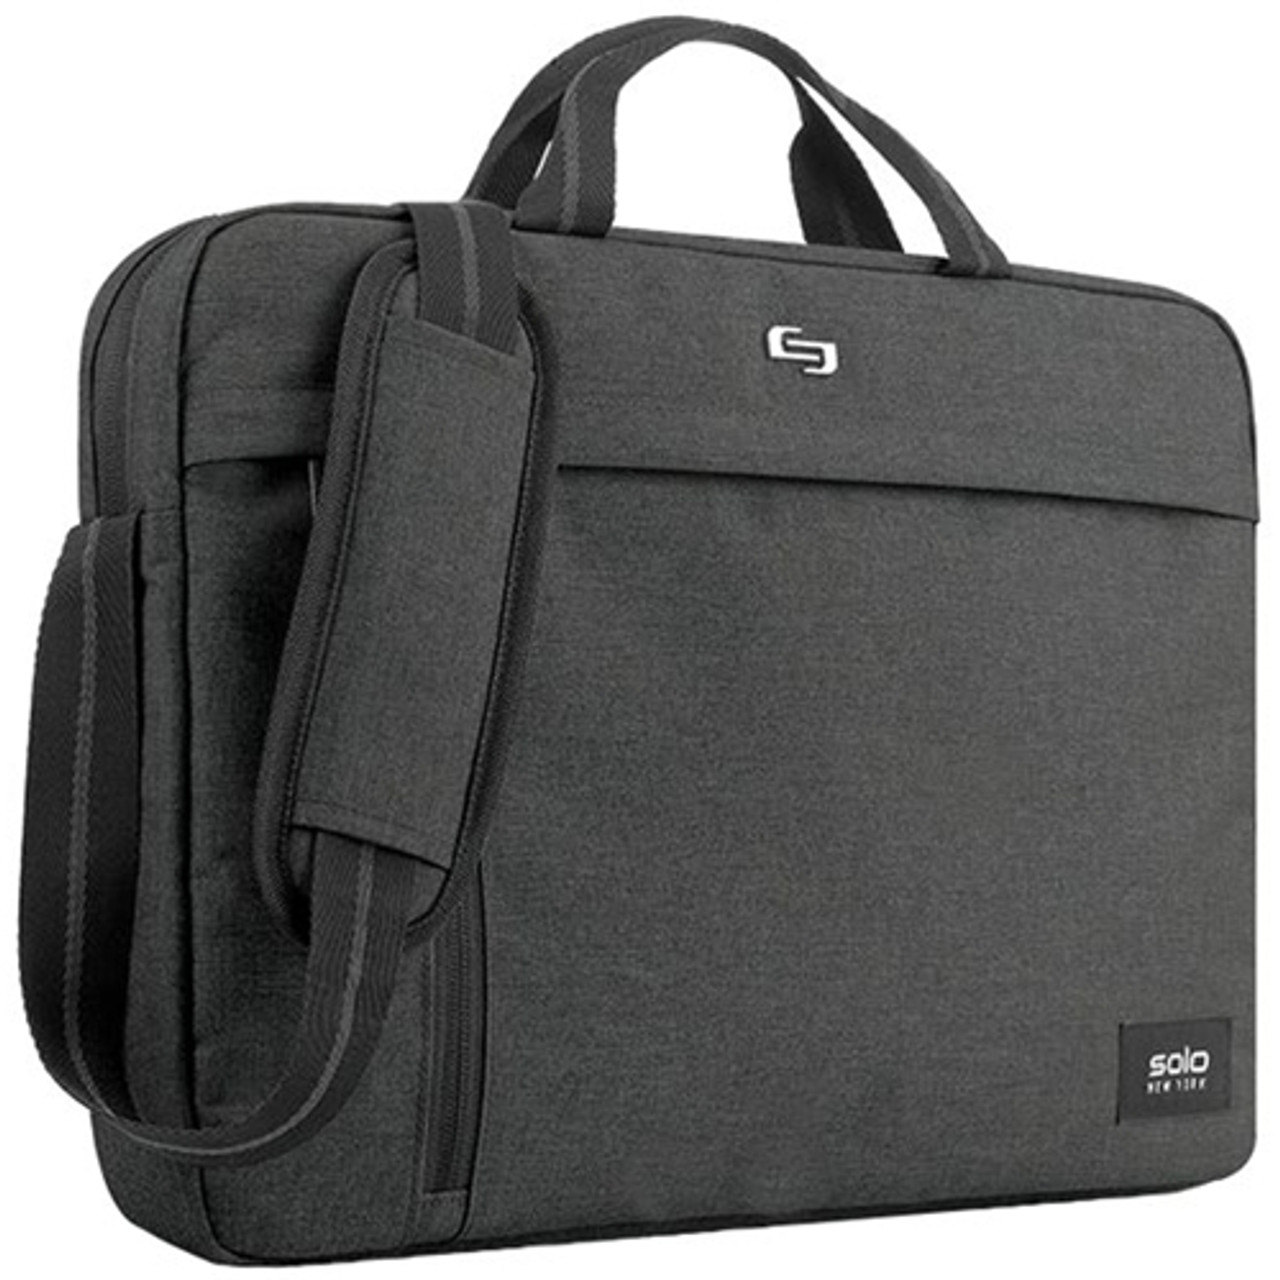 solo New York - Case for 15.6" Laptop - Gray